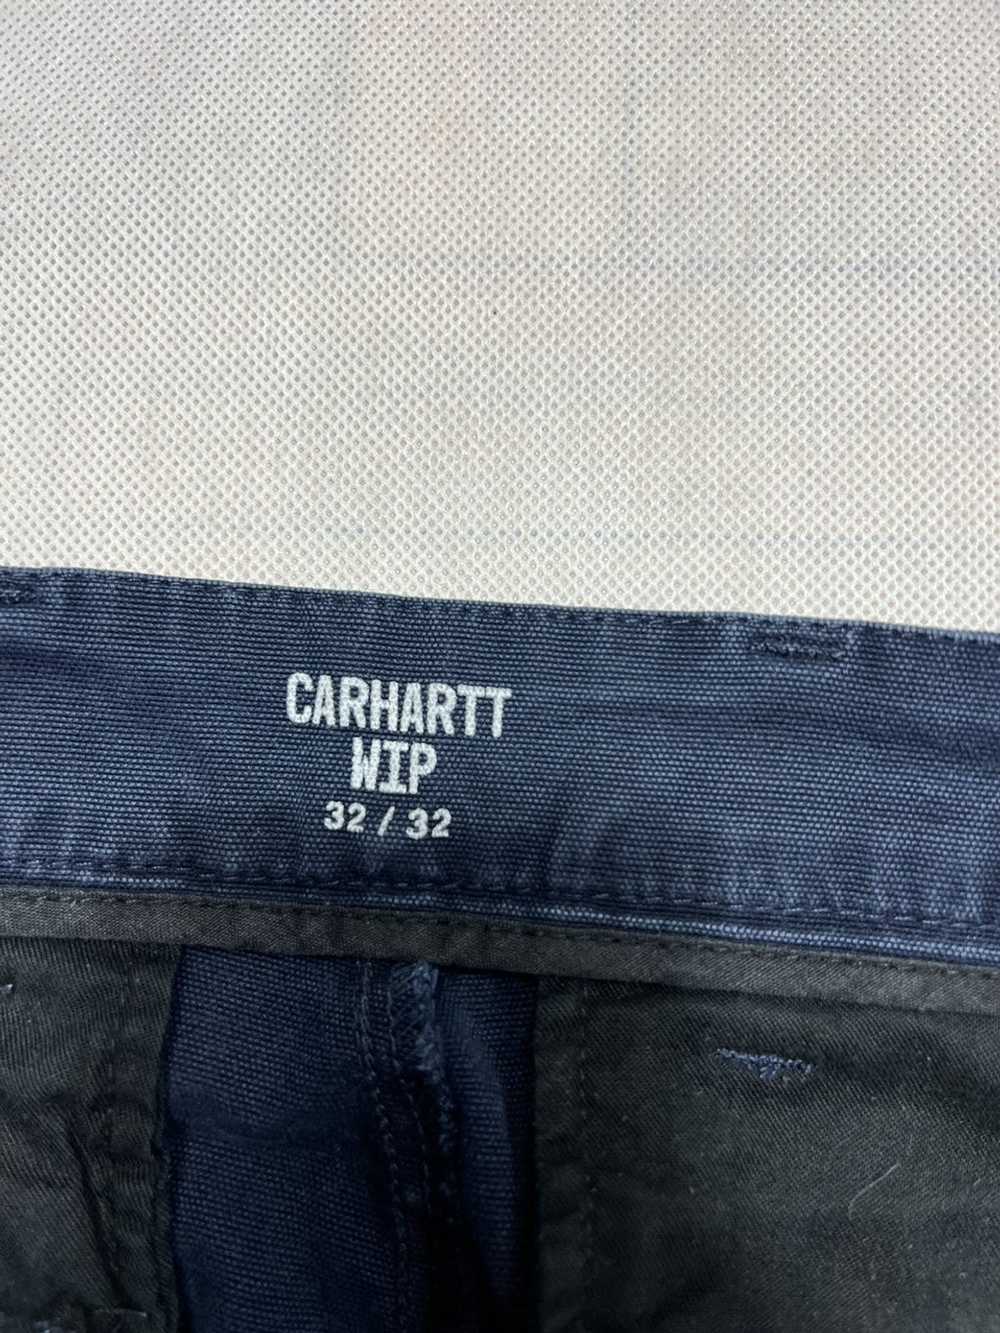 Carhartt Trousers pants Carhartt Washed - image 7